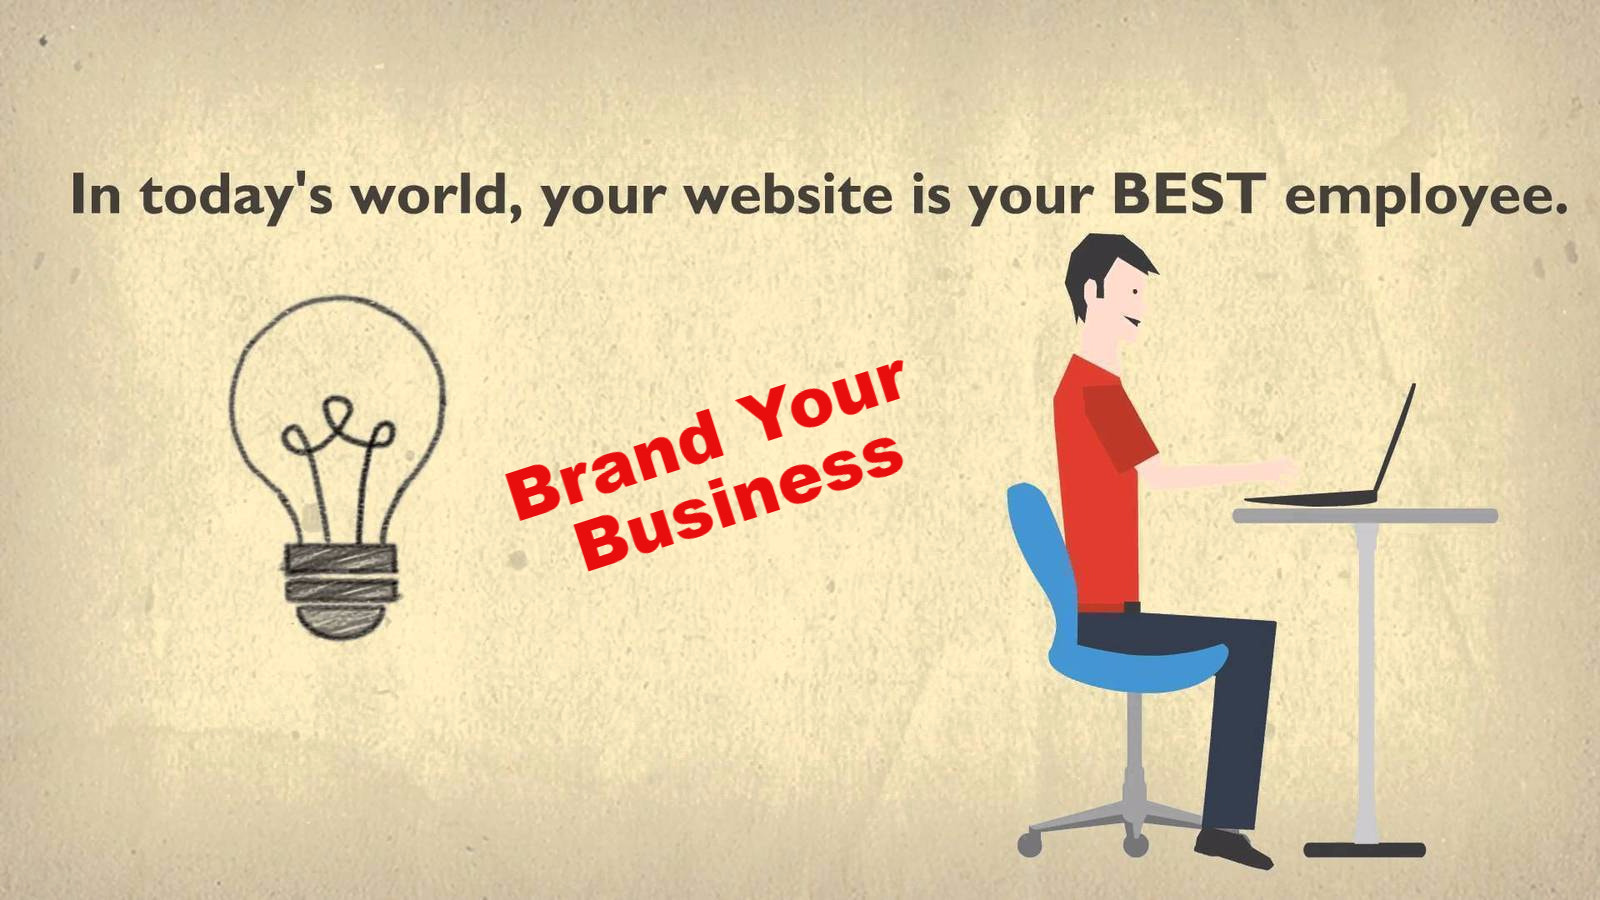 How SEO brands your business increase the sales?